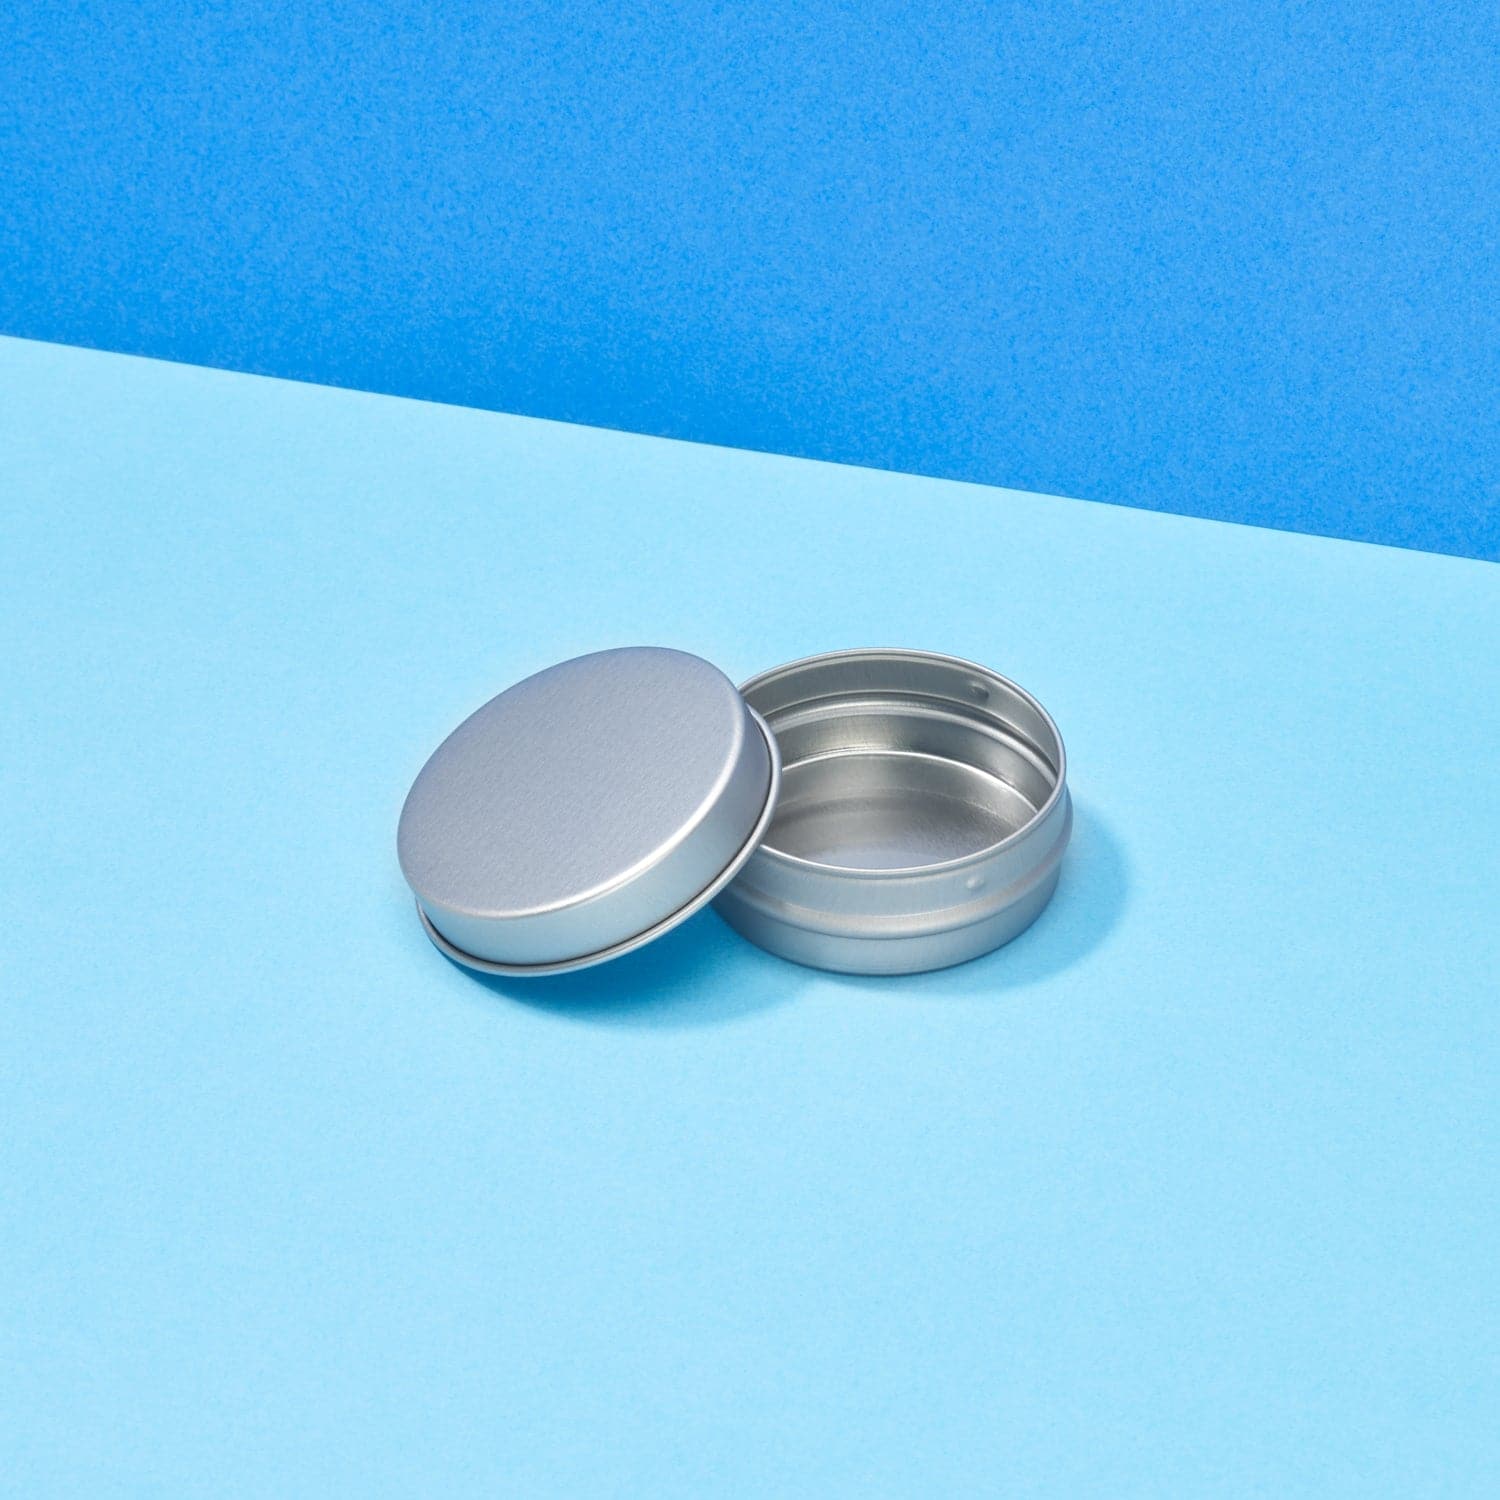 Silver lip balm tin showing lid pips and internal tin view.